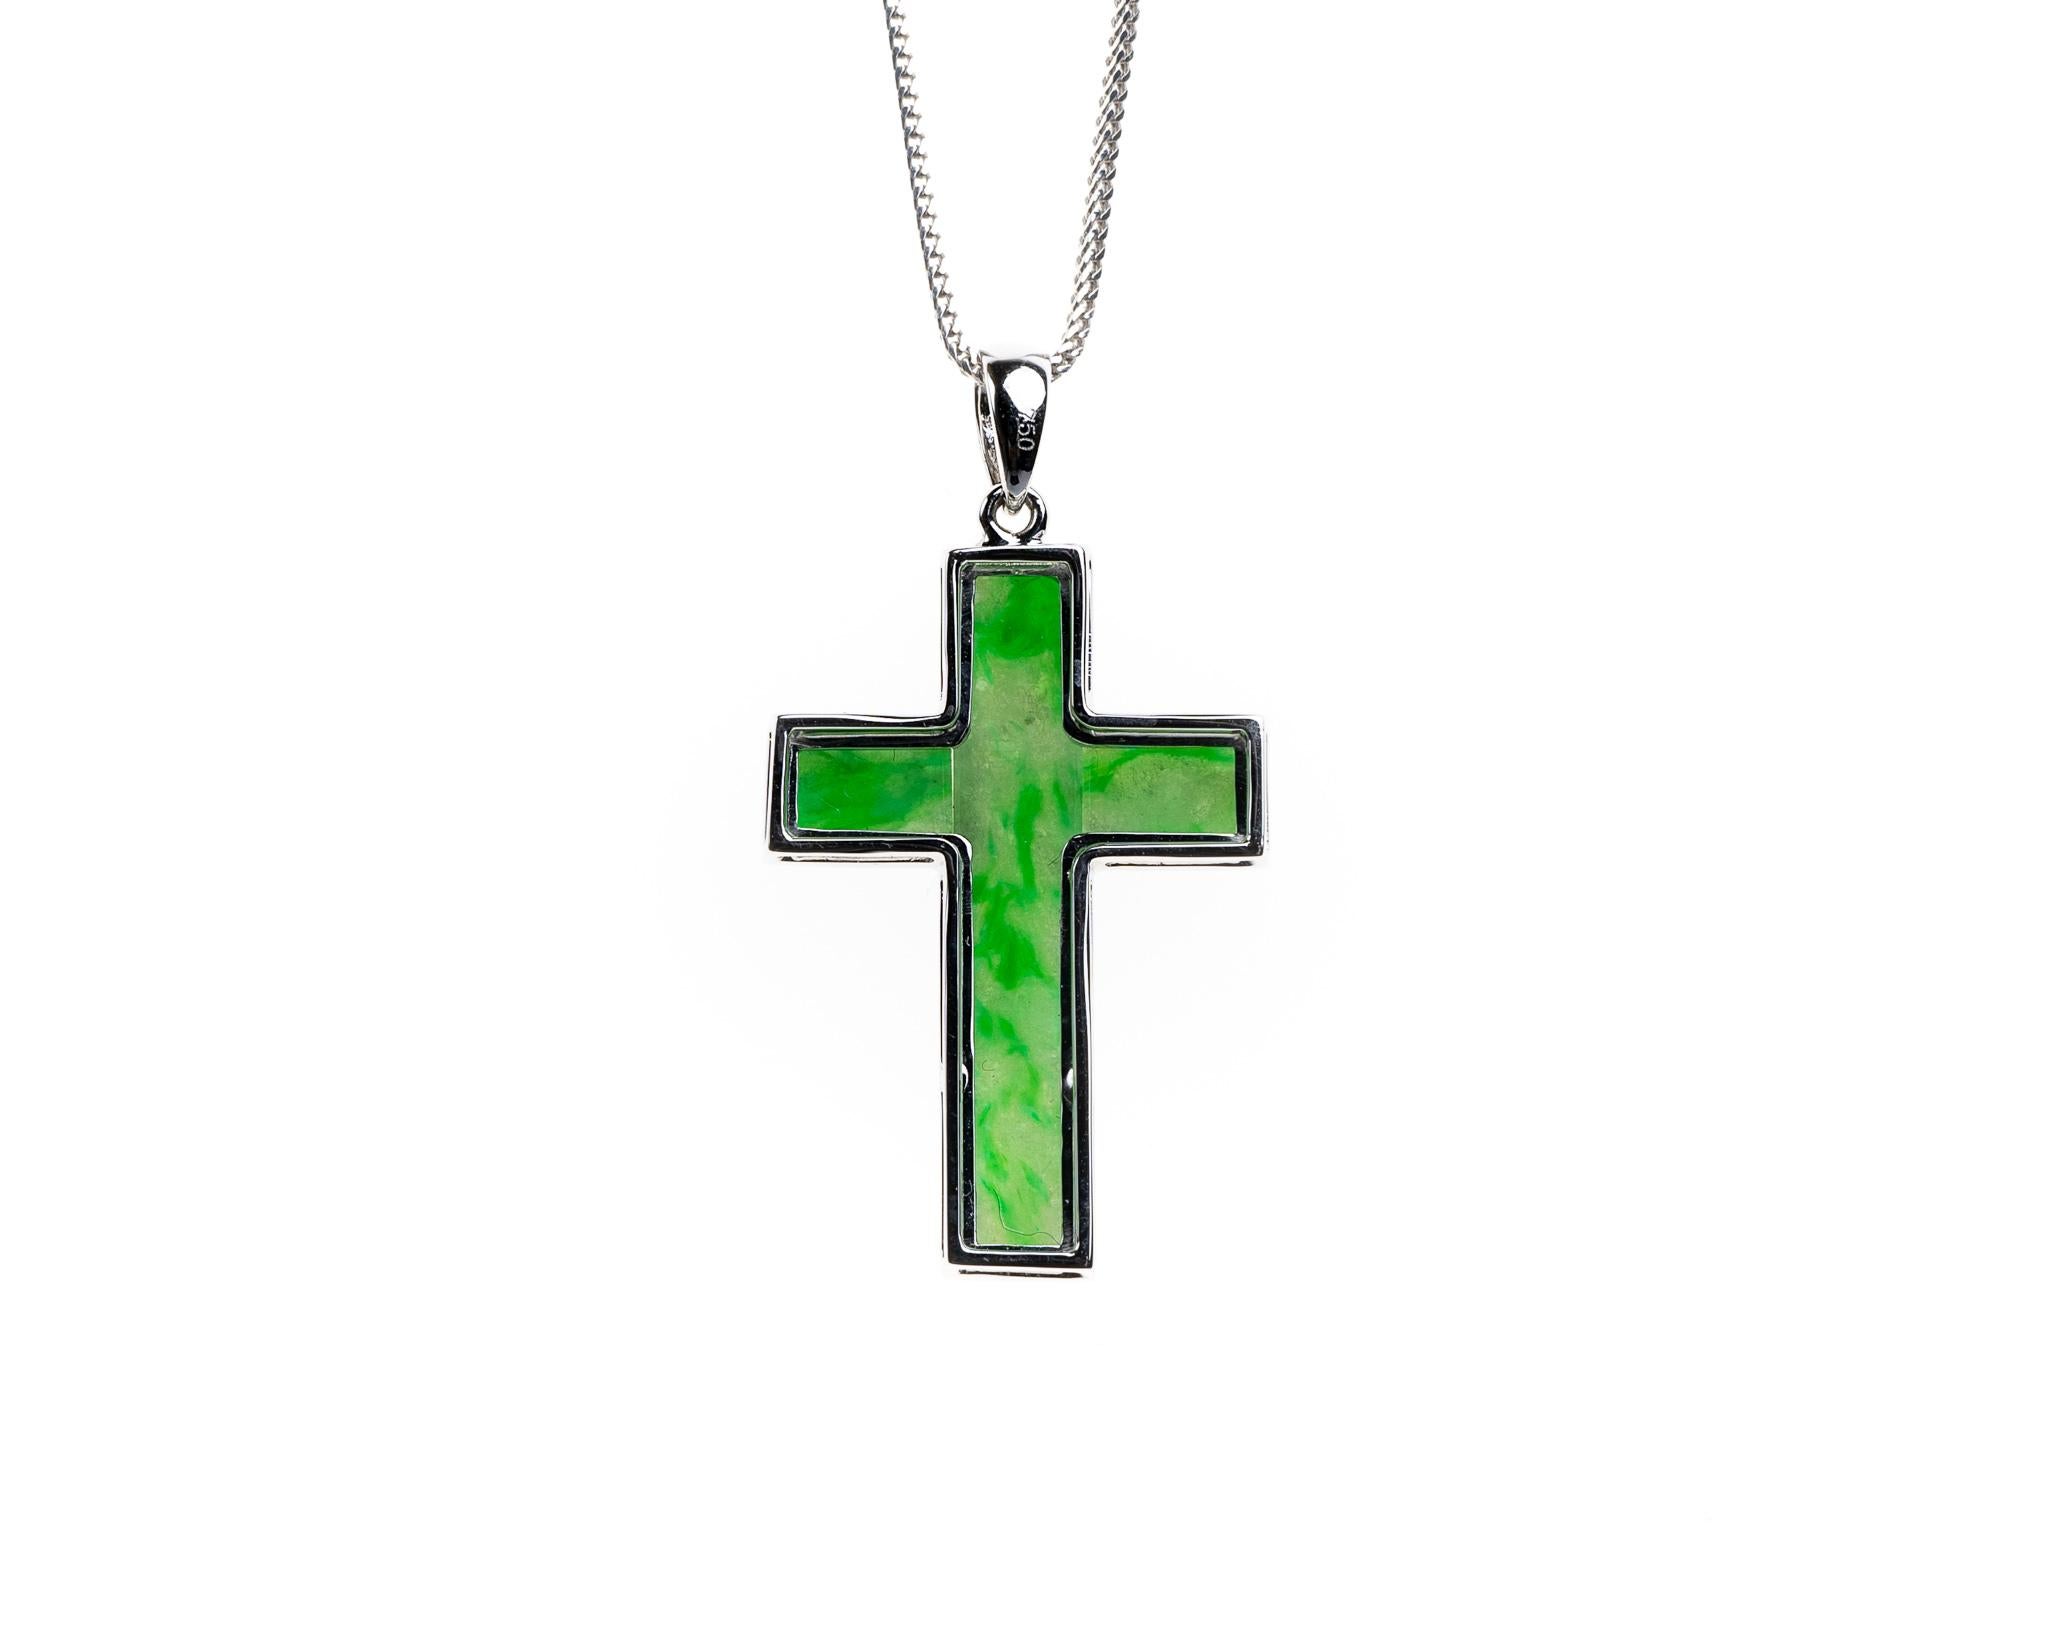 This all natural, untreated green jadeite jade carved cross with a 18k white gold setting. 

It measures 0.81 inches (20.8mm) x 1.19 inches (30.3mm) and thickness 0.20 inches (5.1mm). 

Included is a Hong Kong Gems Laboratory Jade Identification